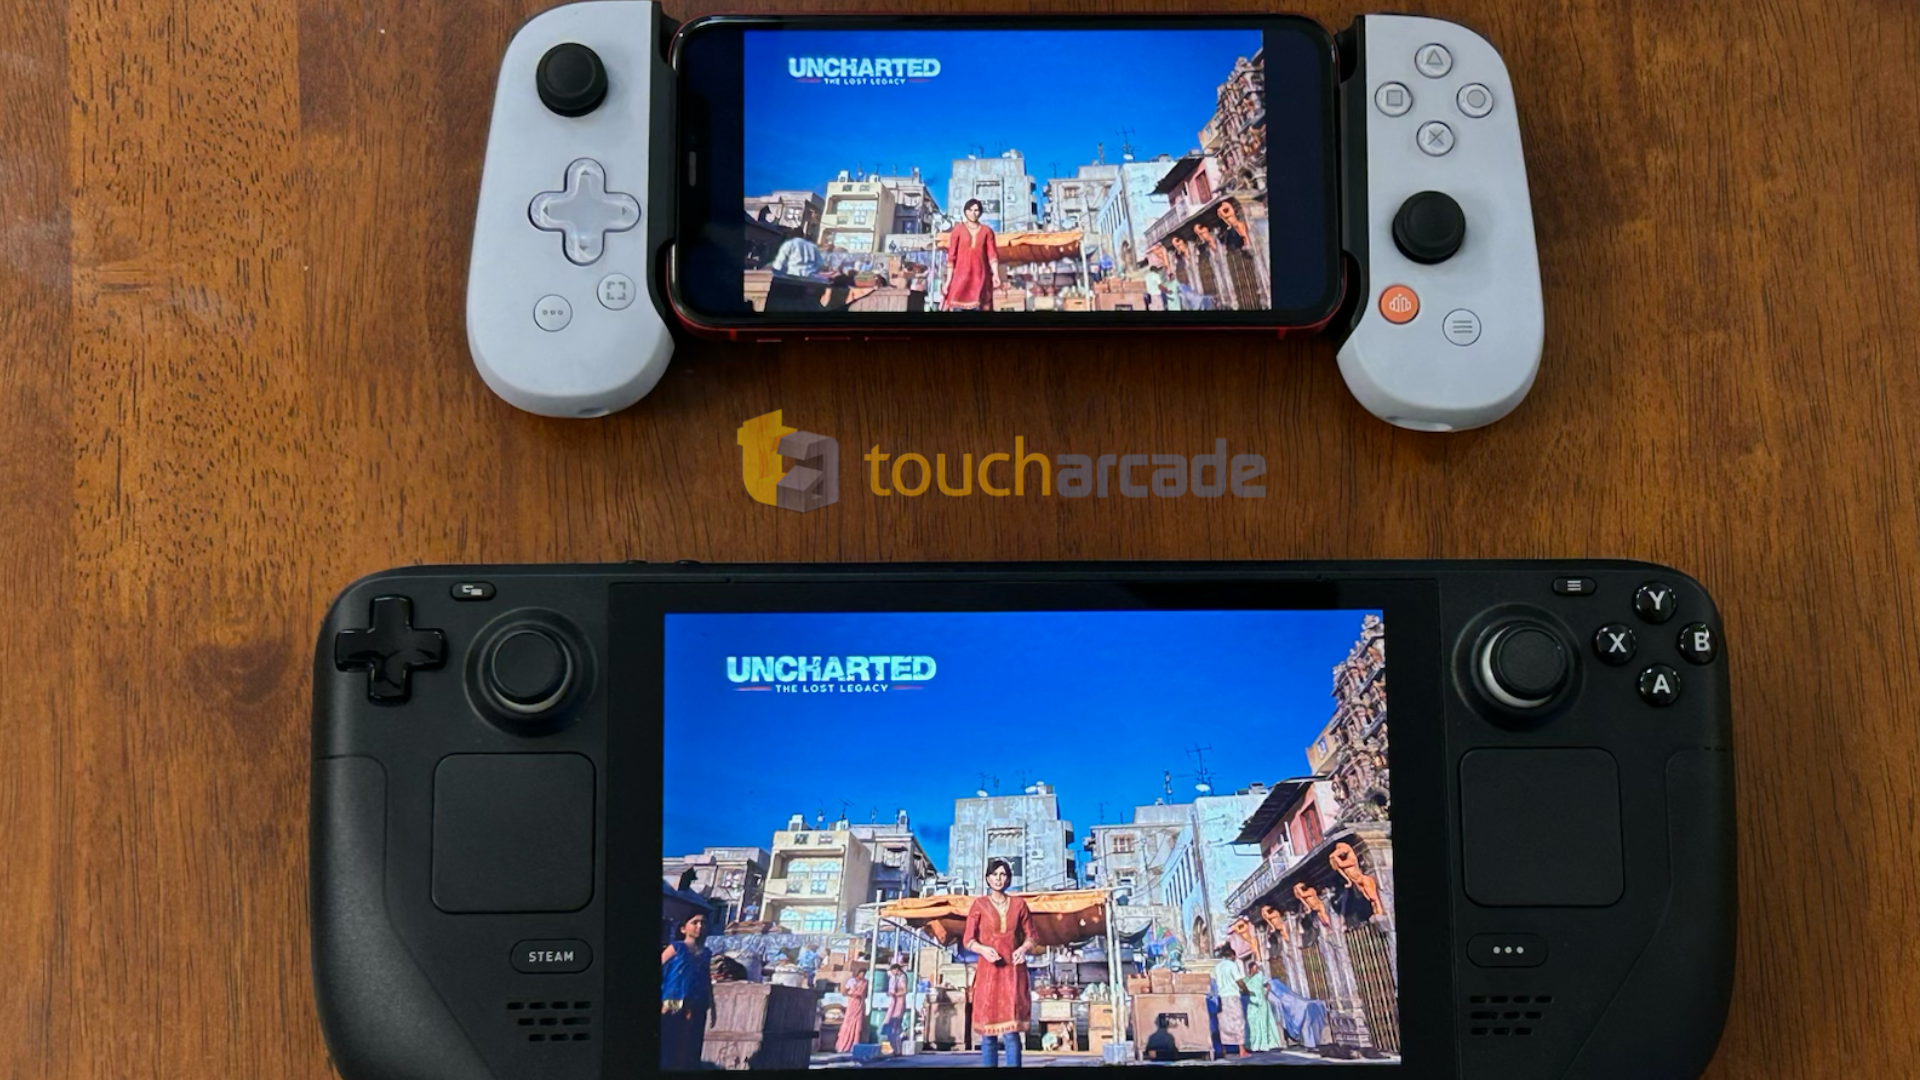 uncharted steam deck vs remote play ios